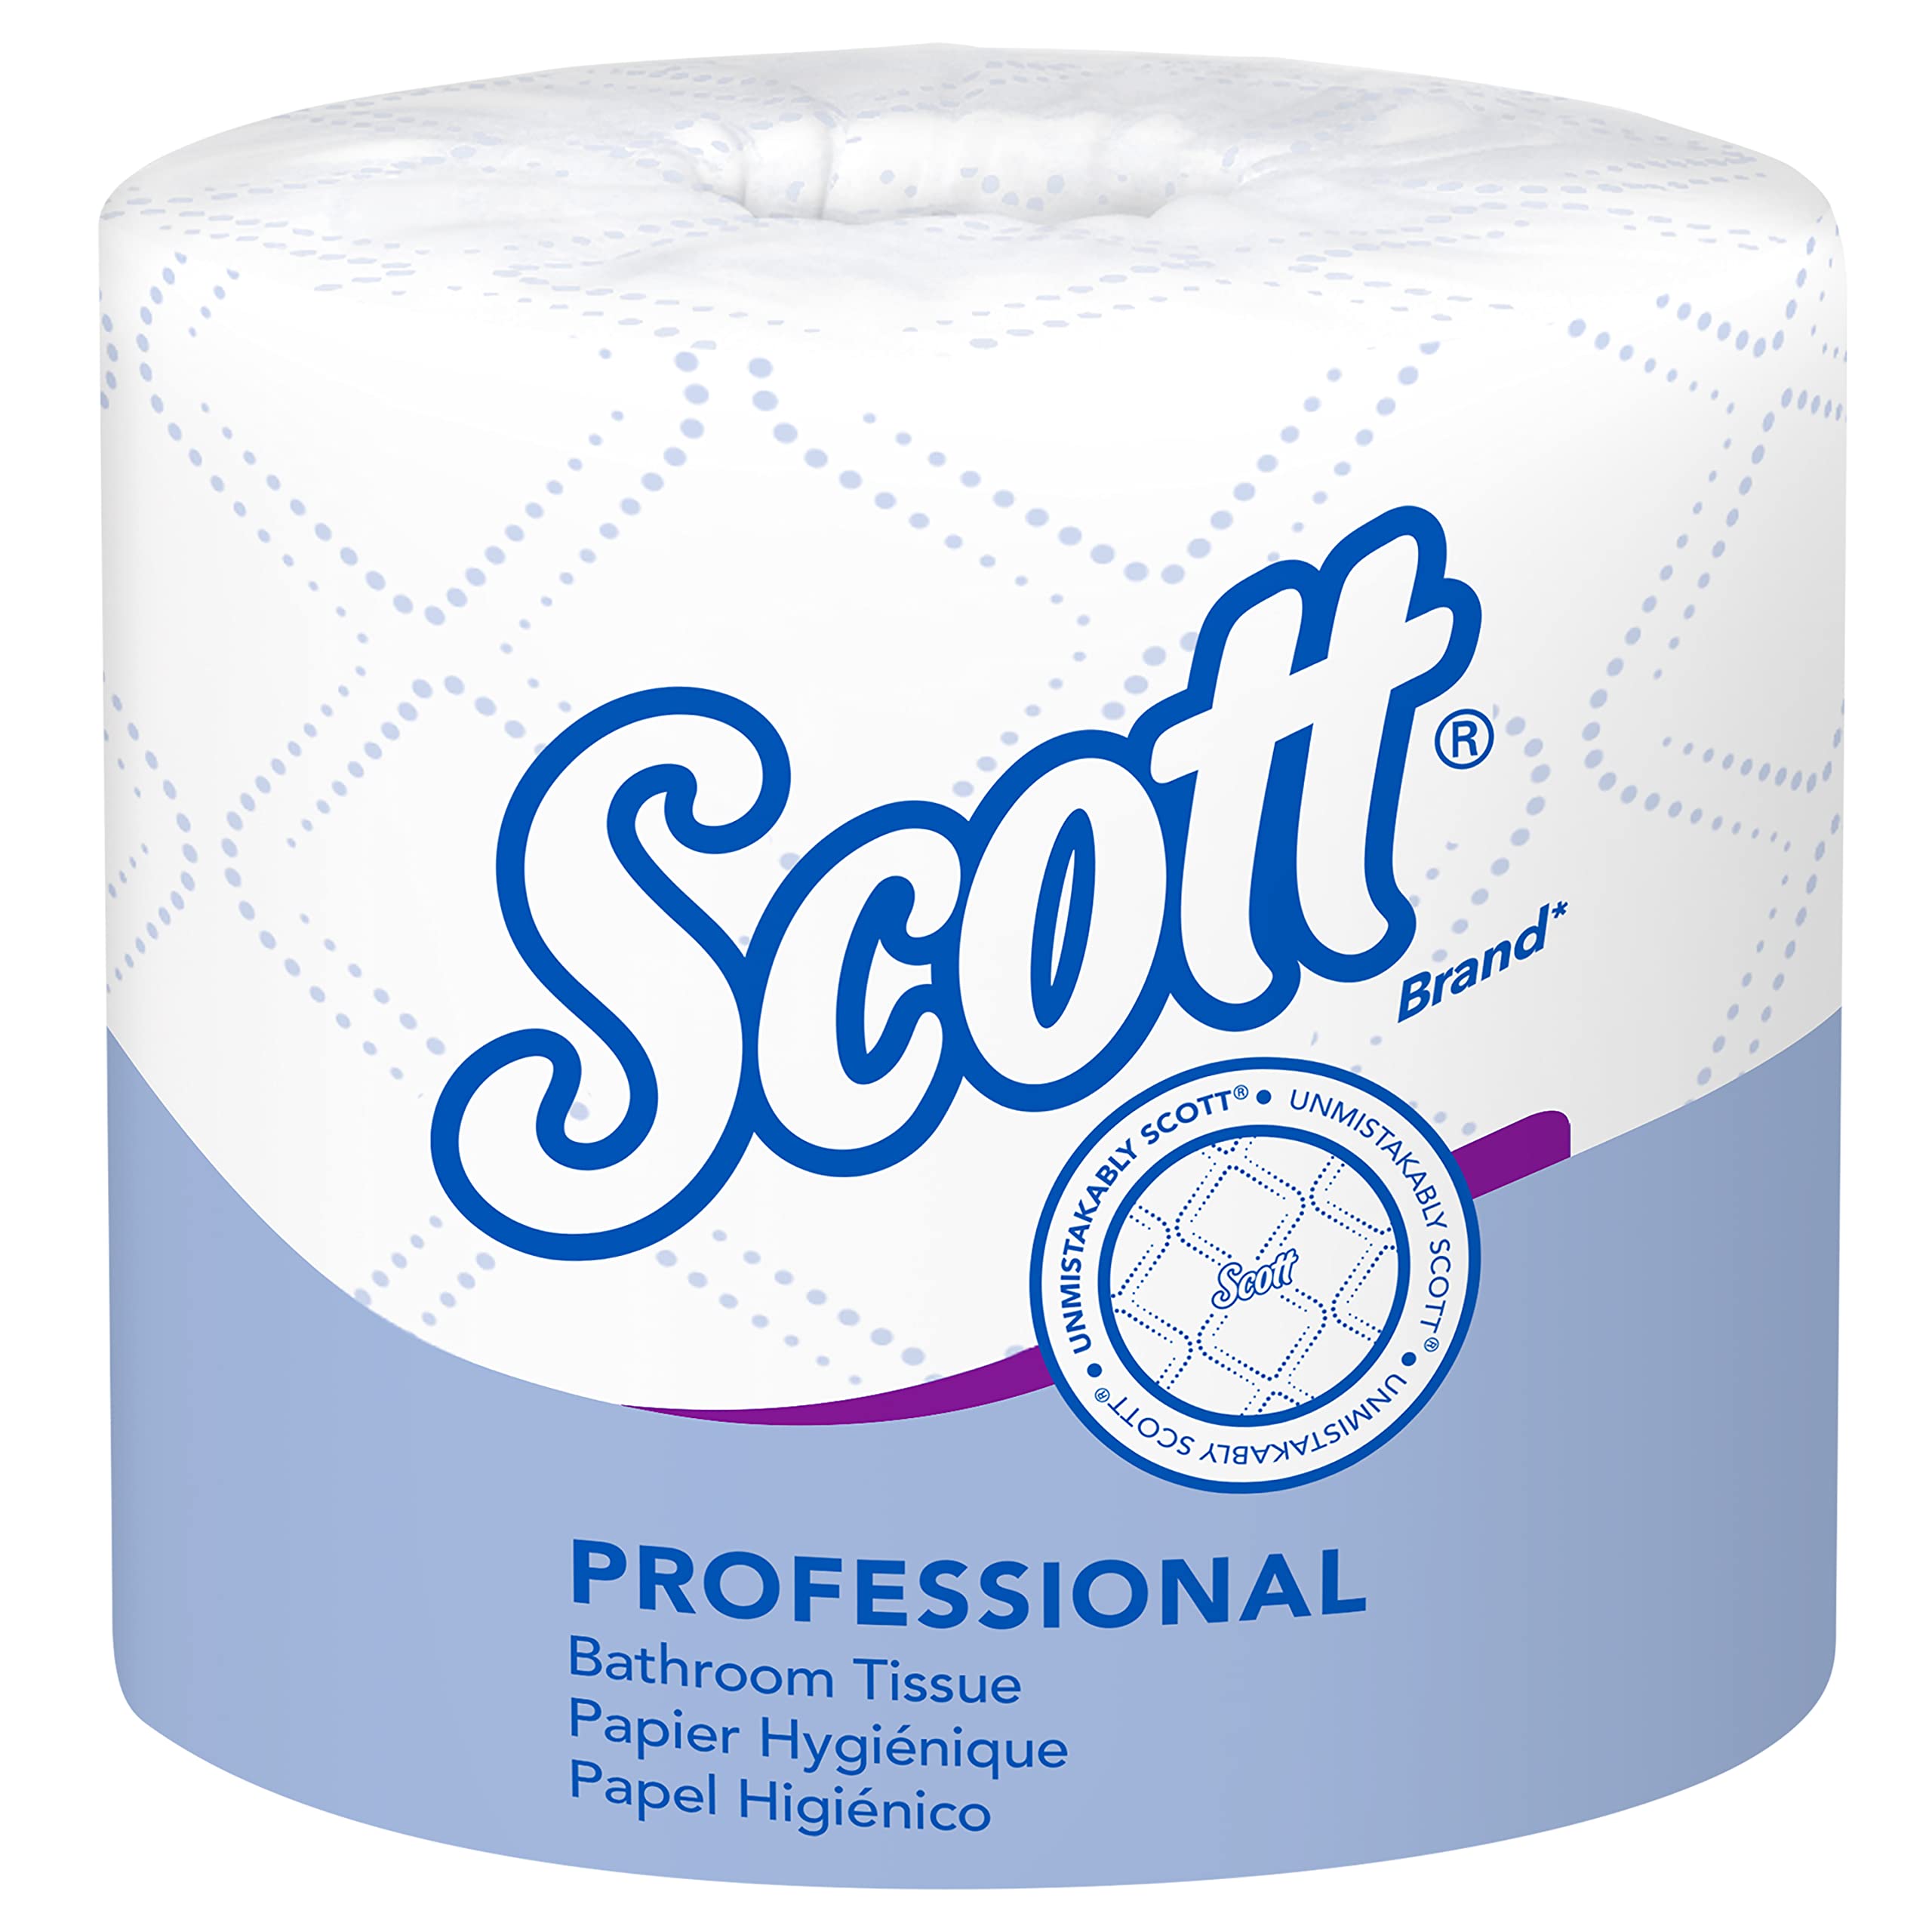 Scott Professional Standard Roll Bathroom Tissue (04460), 2-Ply, White, 80 Rolls / Case, 550 Sheets / Roll, 44,000 Sheets / Case